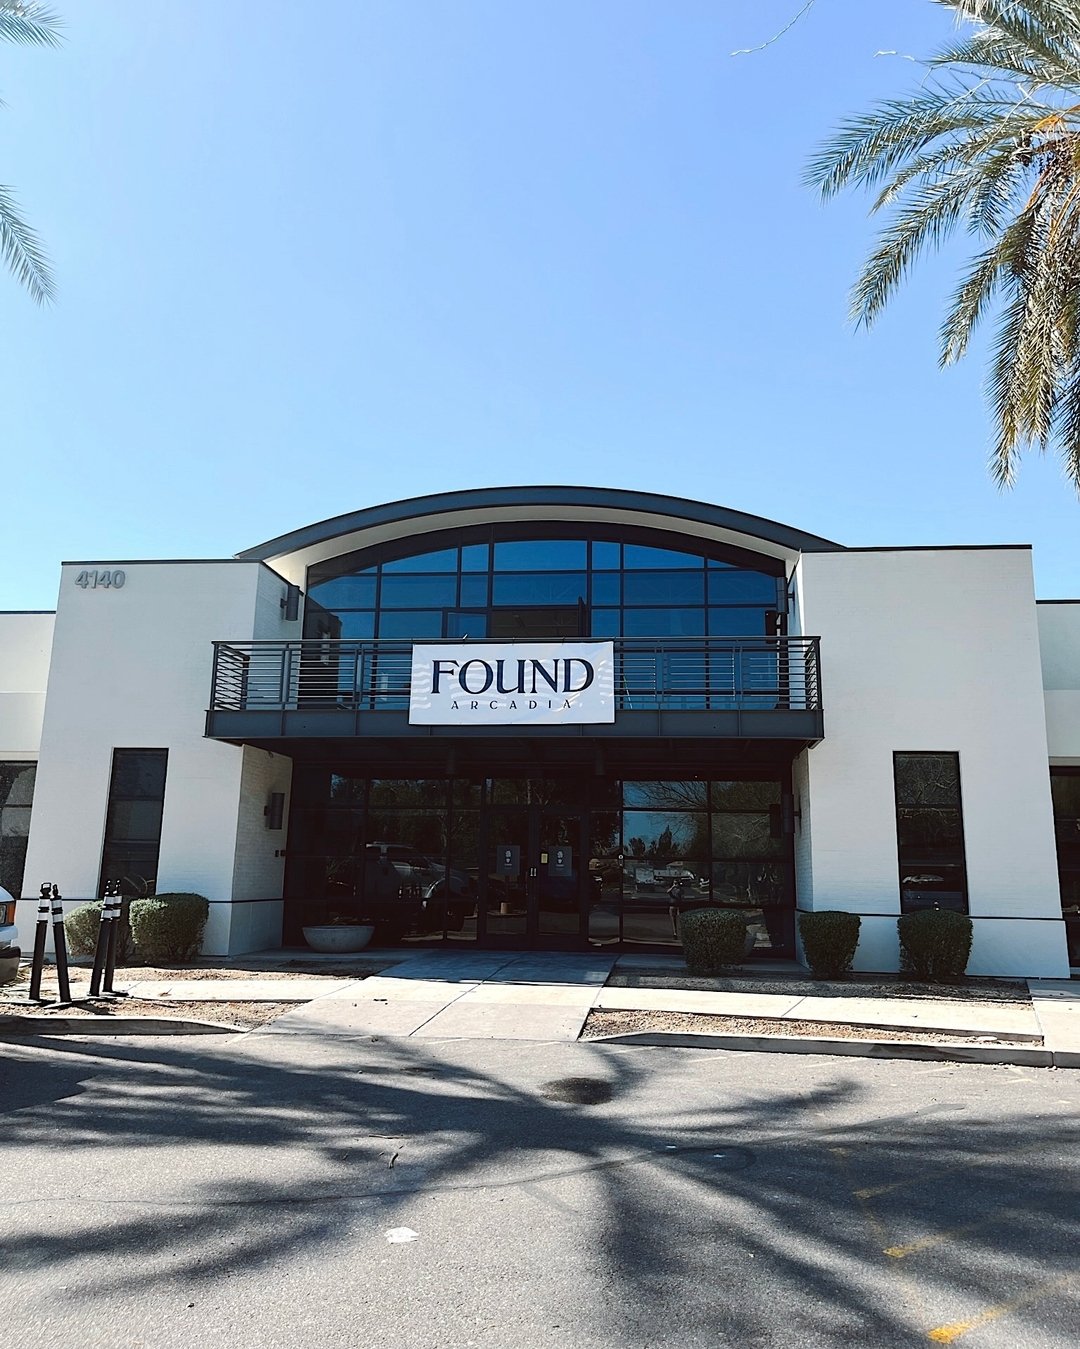 We loved working on the new store for @foundarcadia! 💫 This space will be opening in April and will be their new location for providing premium furniture and home goods. This job had an interesting combination of metalwork and windows throughout the